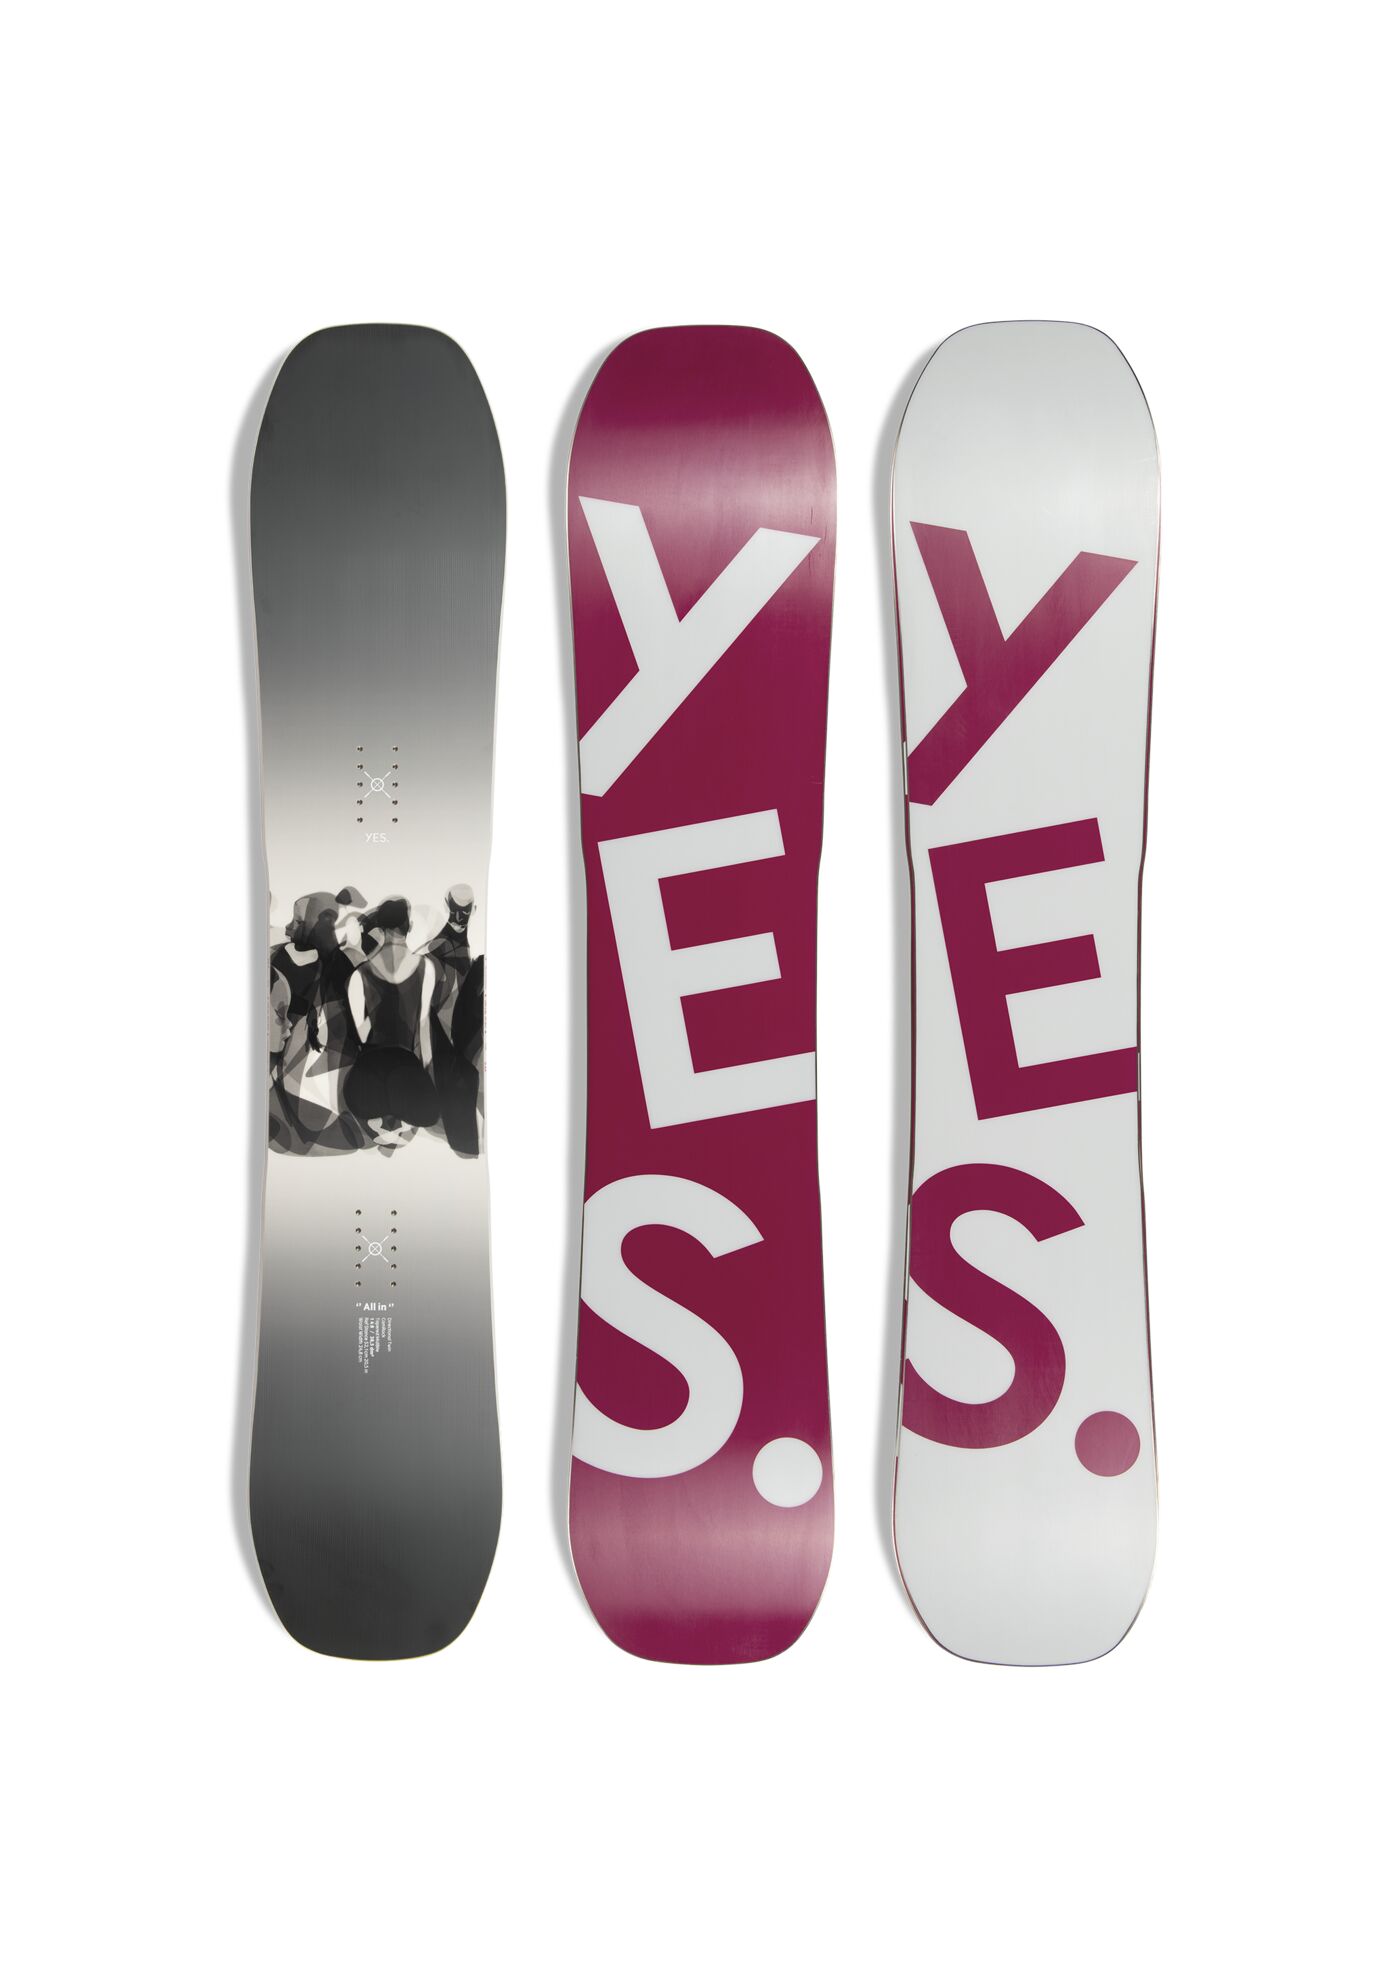 Placa snowboard Unisex YES All-In BLEM 23/24